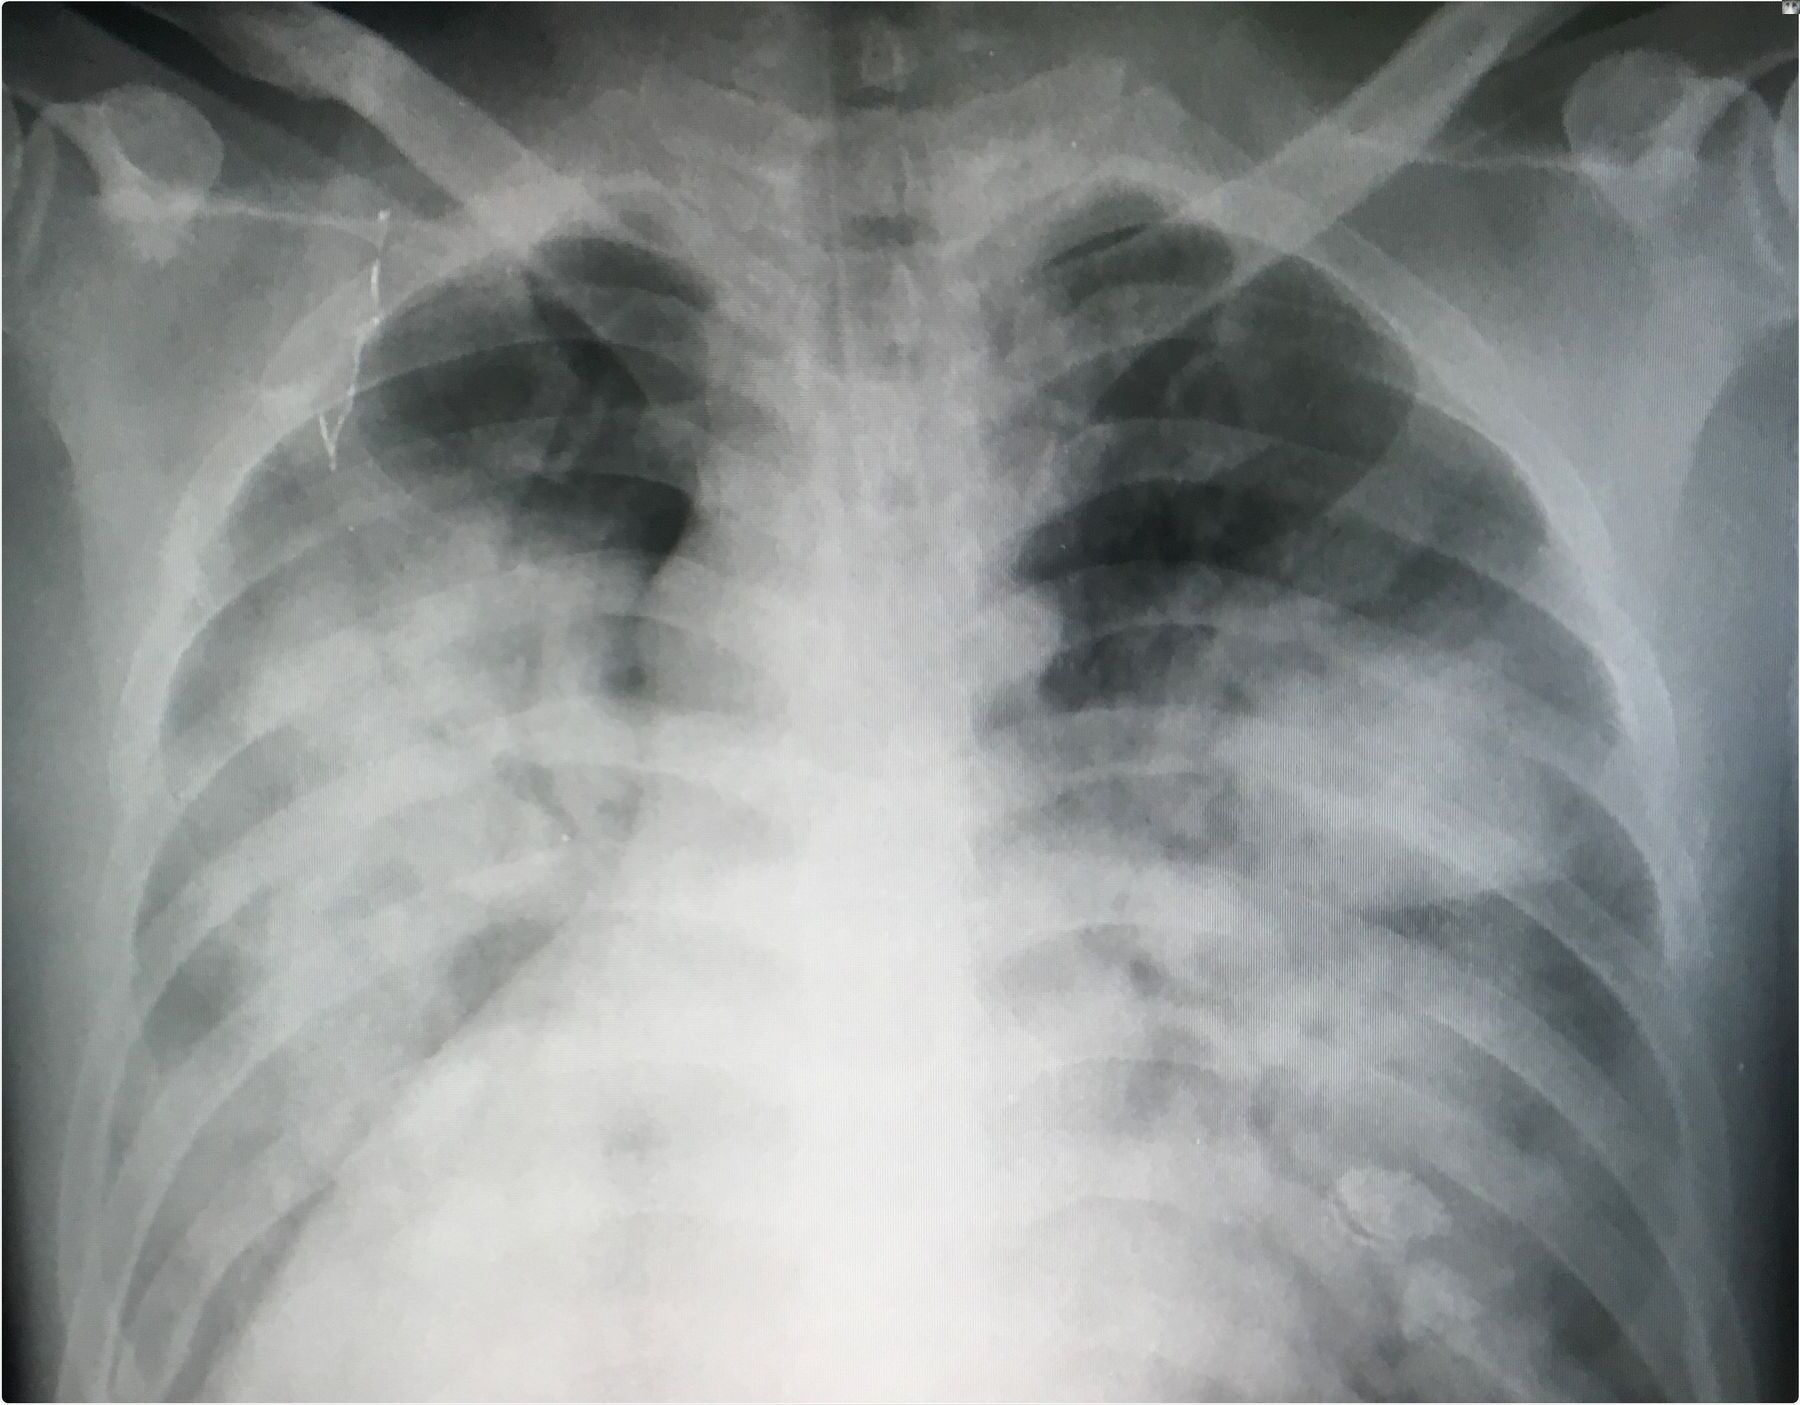 25-facts-about-acute-respiratory-distress-syndrome